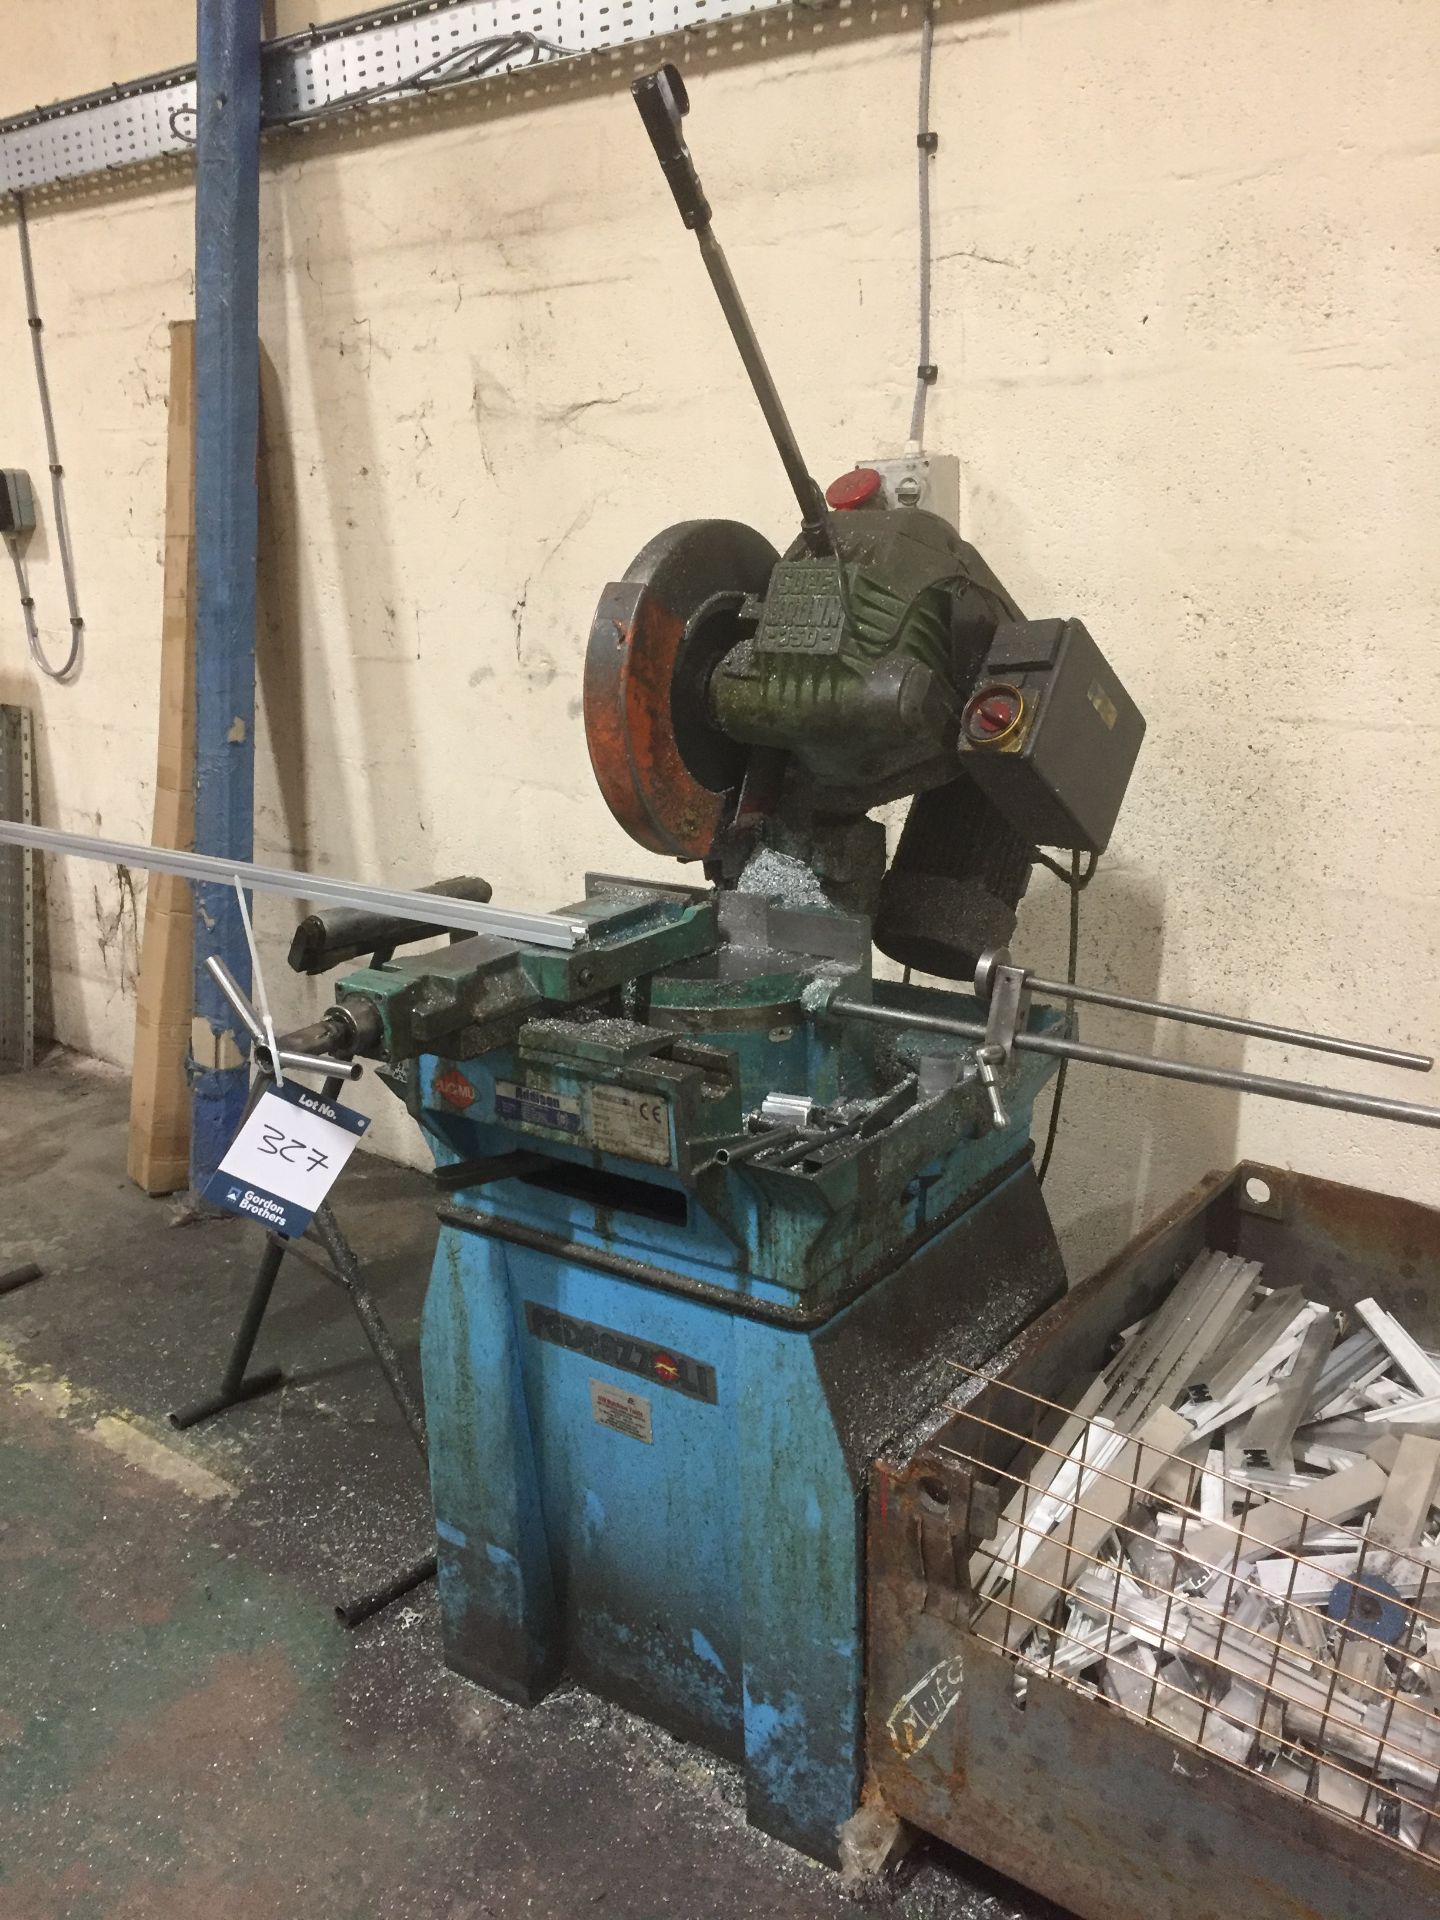 Pedrazzoli Troncatrice Super Brown 350/60 MRM cut to length saw, 110 volt **This lot is located at